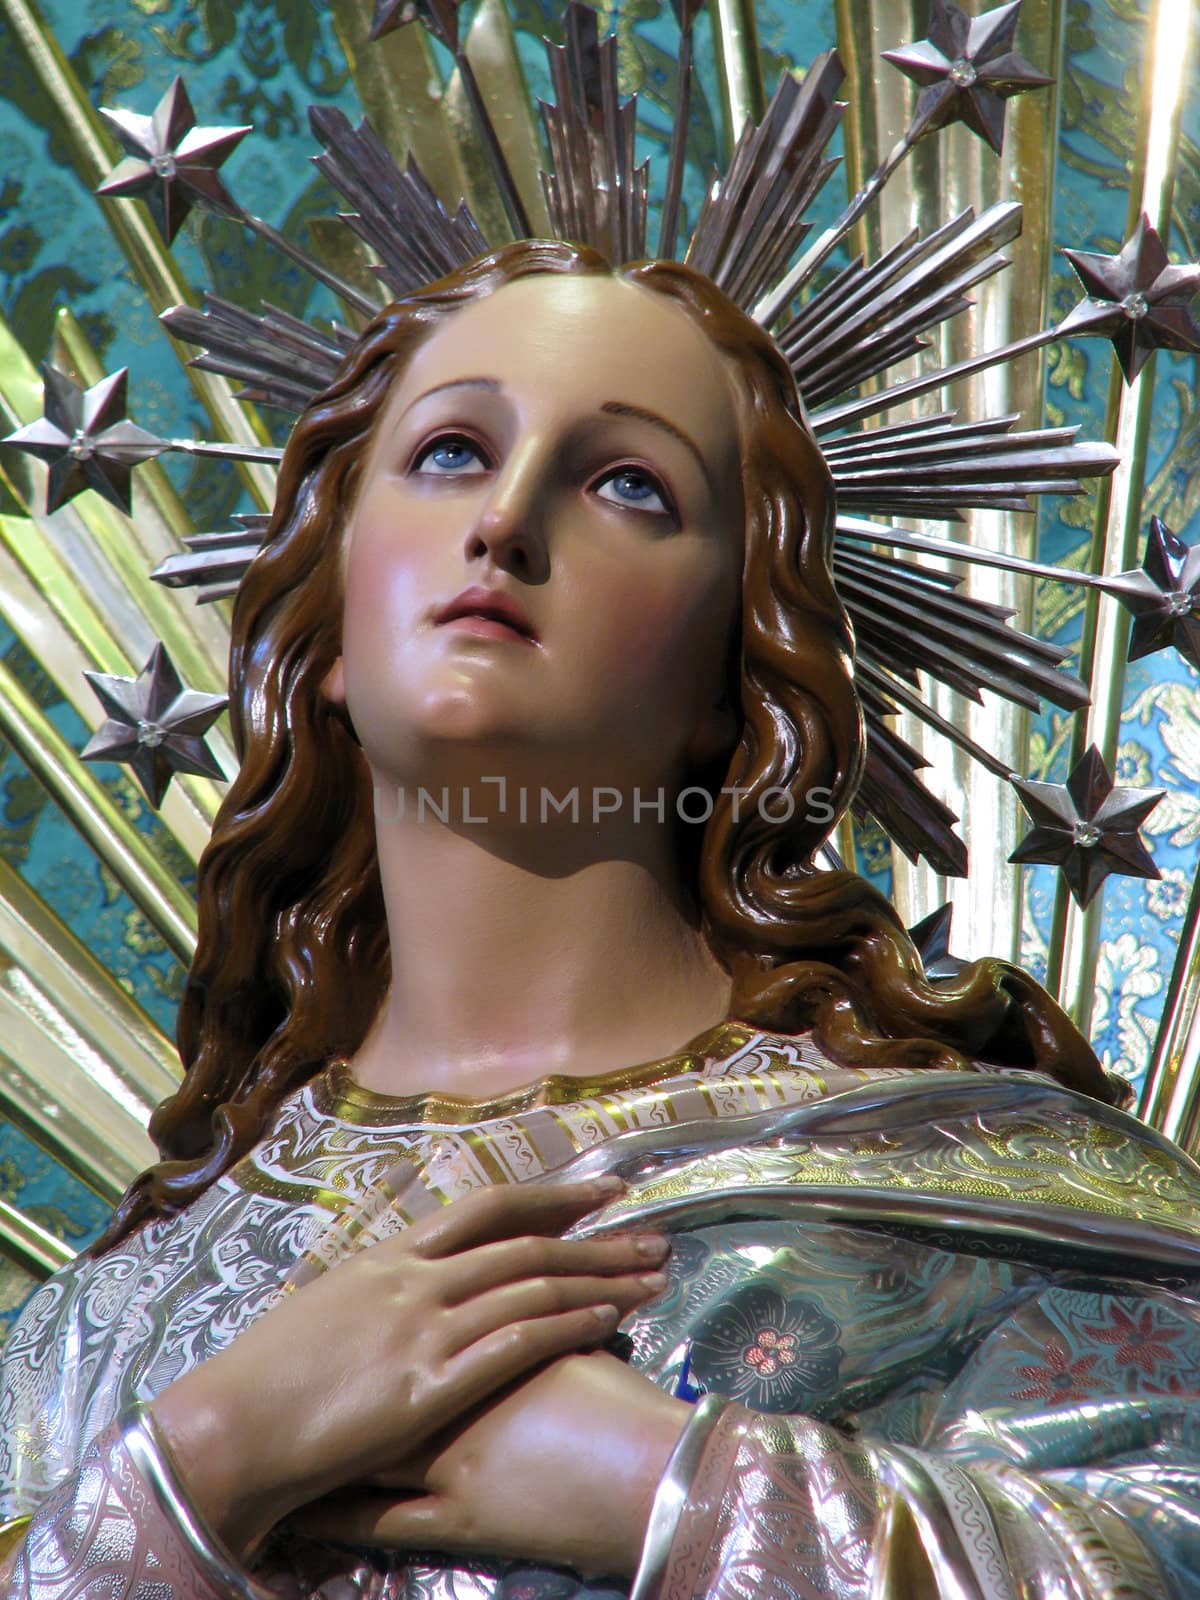 A detail of the statue of The Immaculate Conception in Hamrun, Malta.